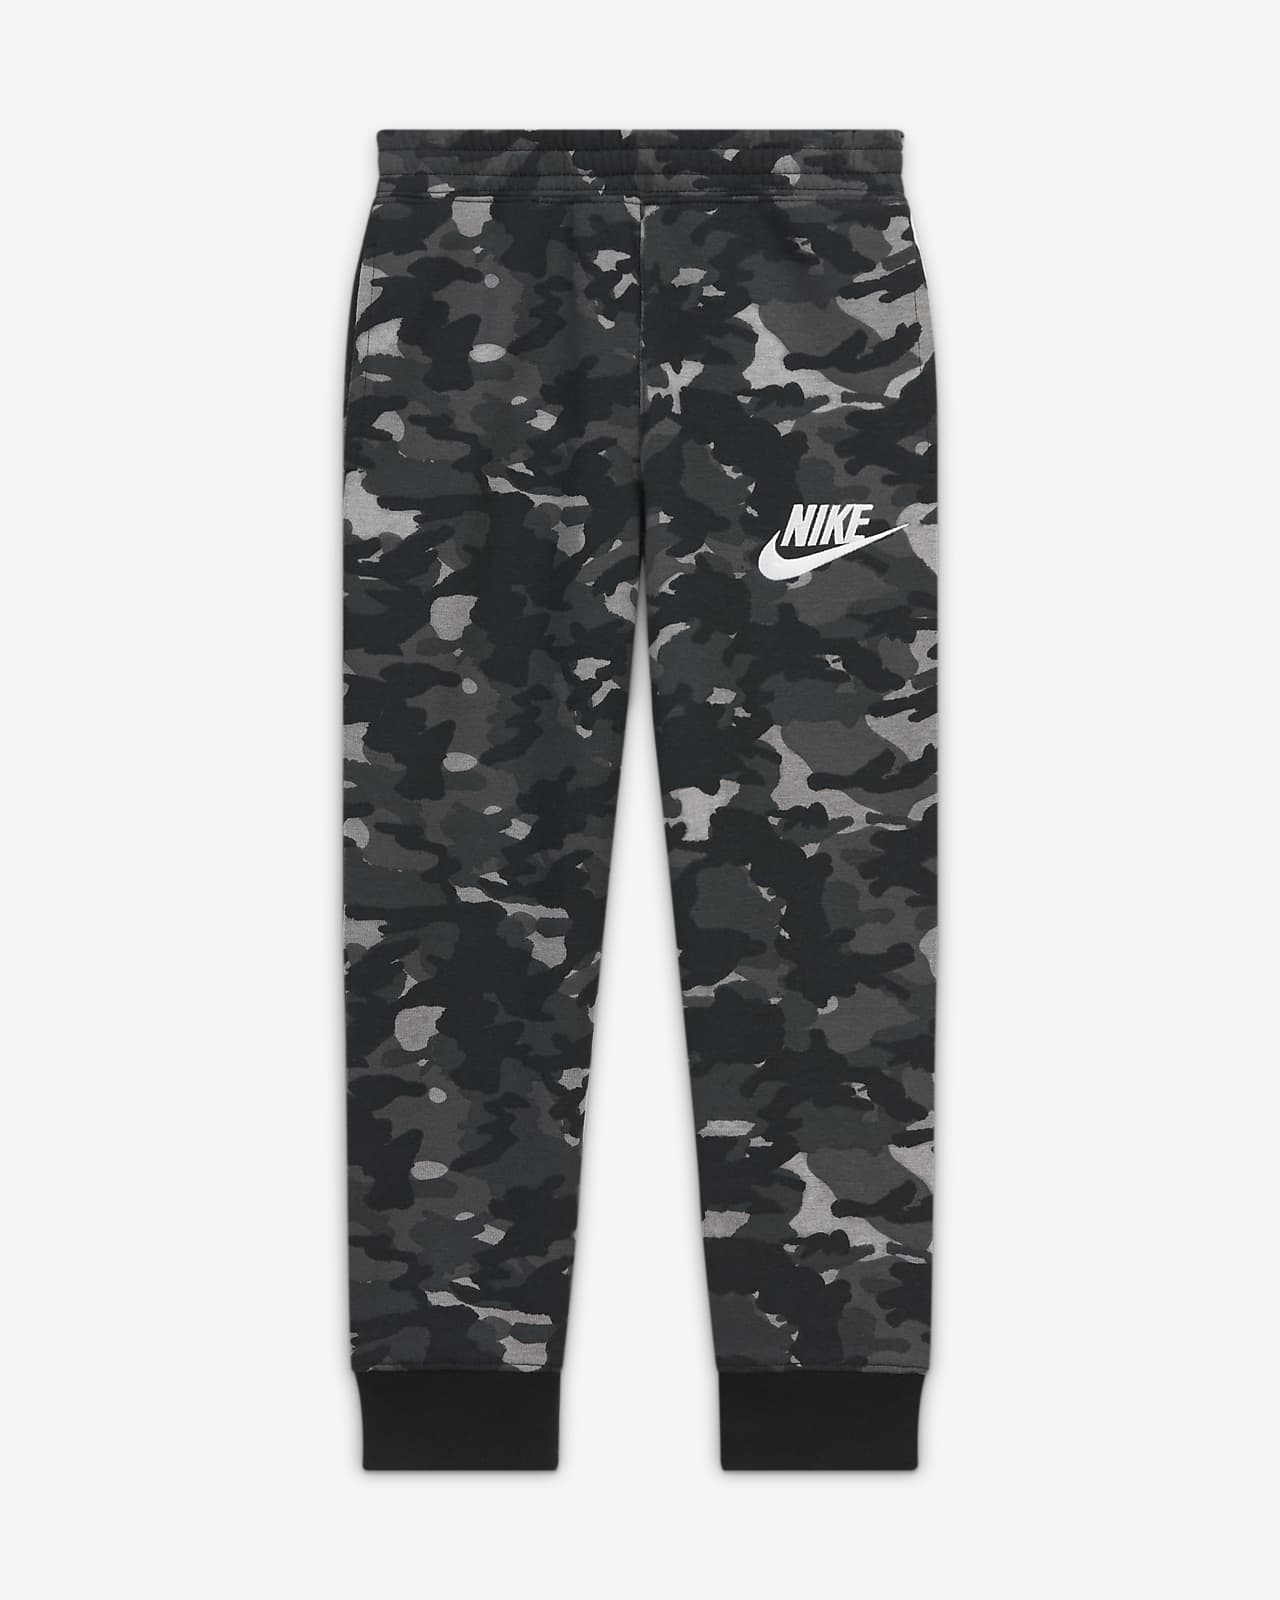 UNDER ARMOUR Nike Camo Joggers Sweatpants Youth S 8-10 M 10-12 L 12-14 XL  14-16